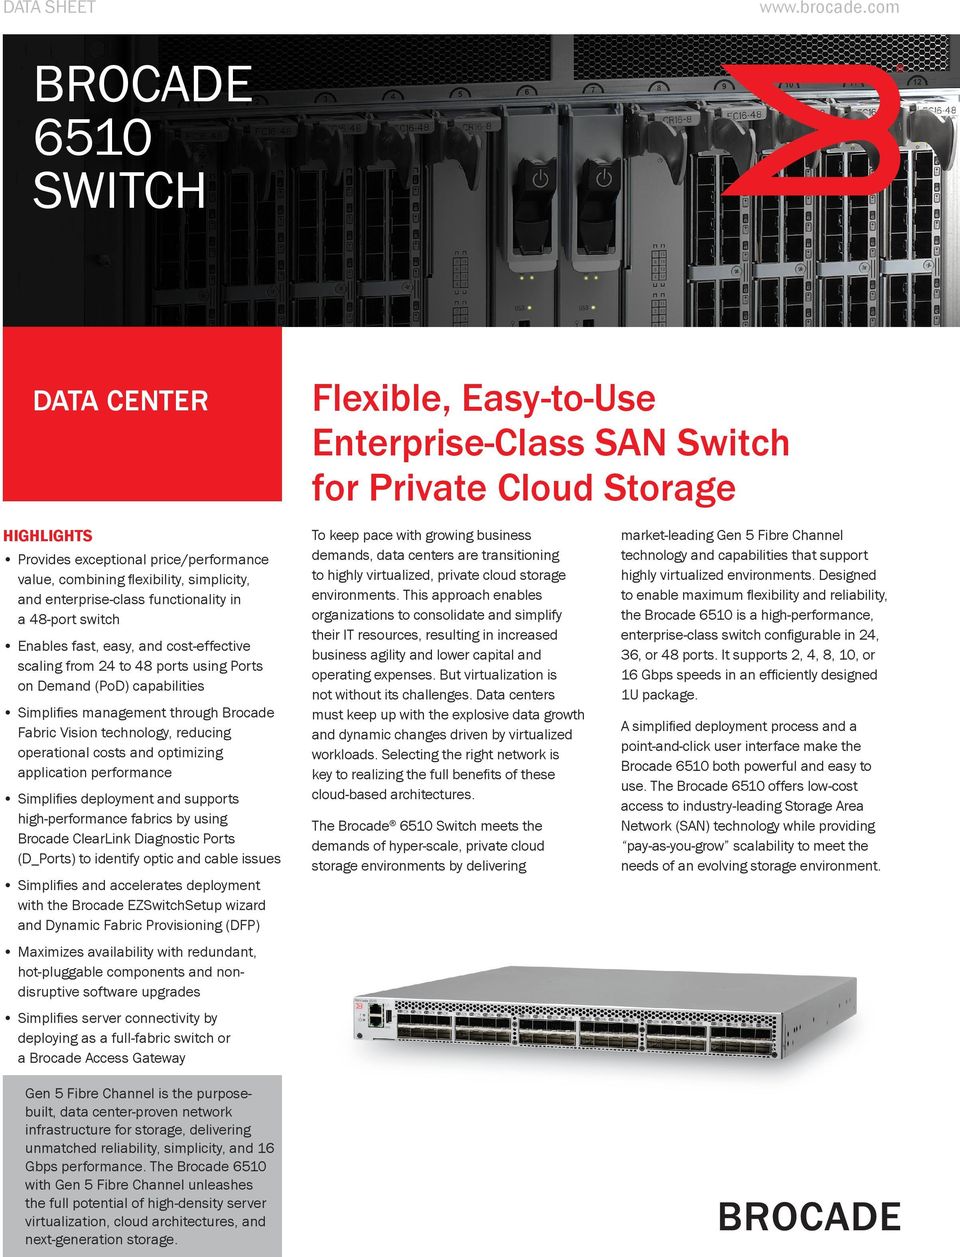 simplicity, and enterprise-class functionality in a 48-port switch Enables fast, easy, and cost-effective scaling from 24 to 48 ports using Ports on Demand (PoD) capabilities Simplifies management